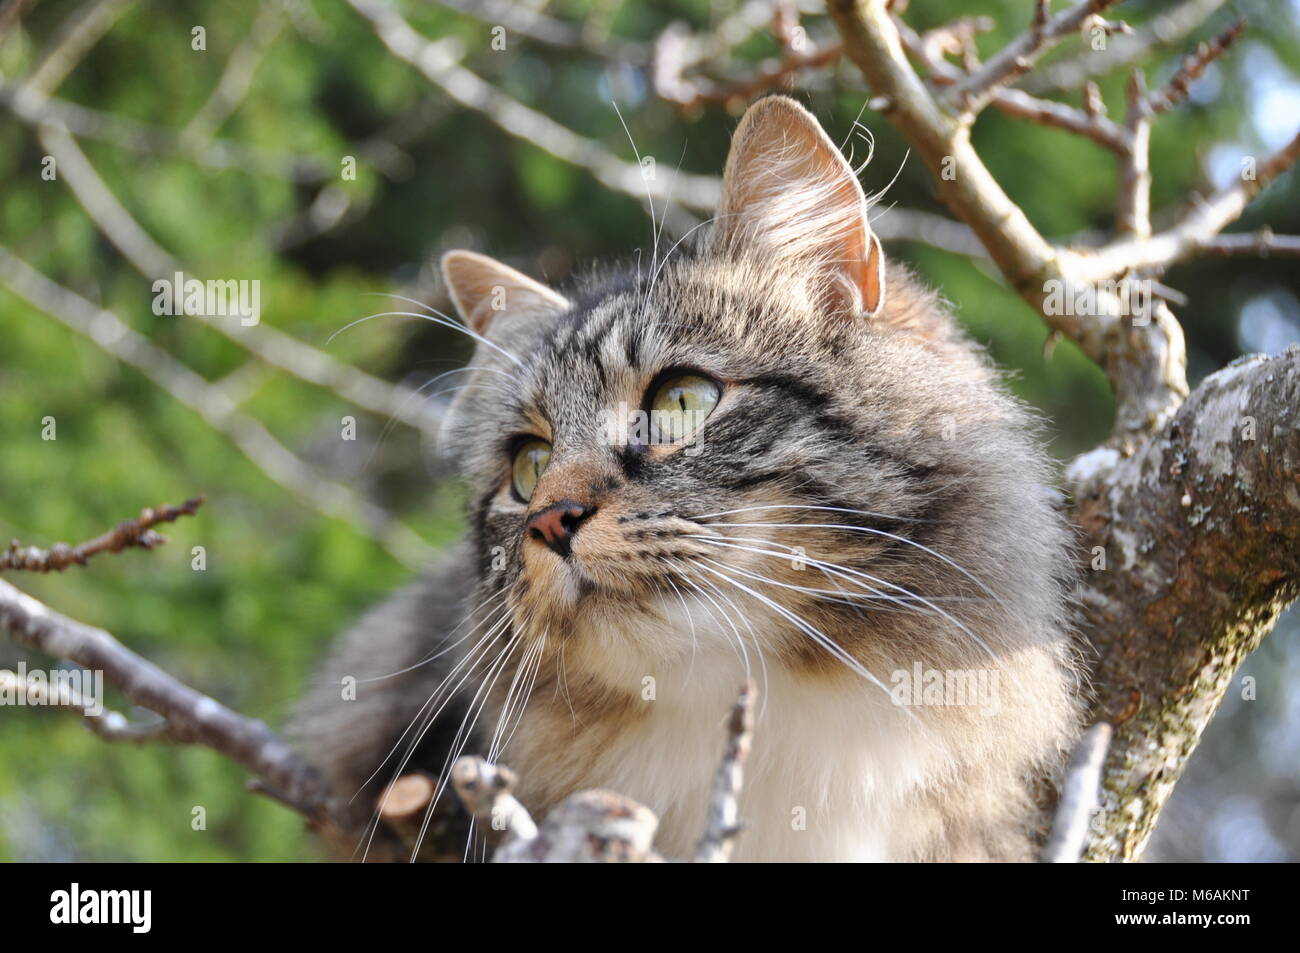 Norwegian forest cat sitting in a tree Stock Photo